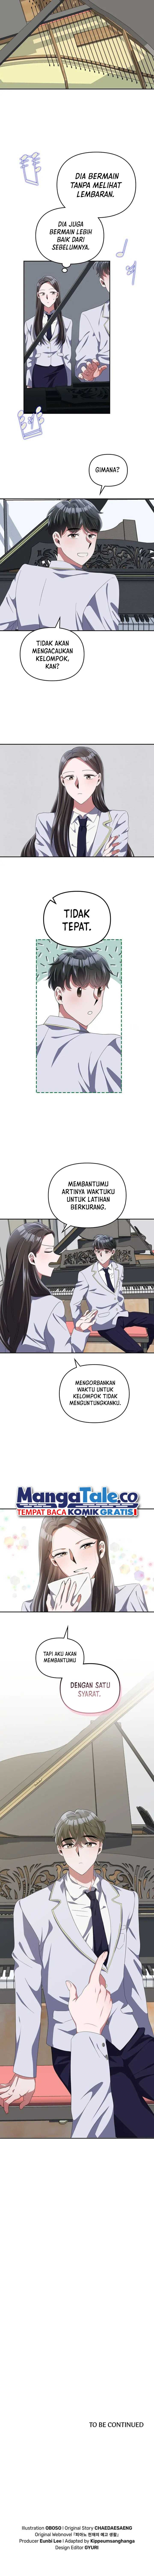 The Life of a Piano Genius Chapter 04